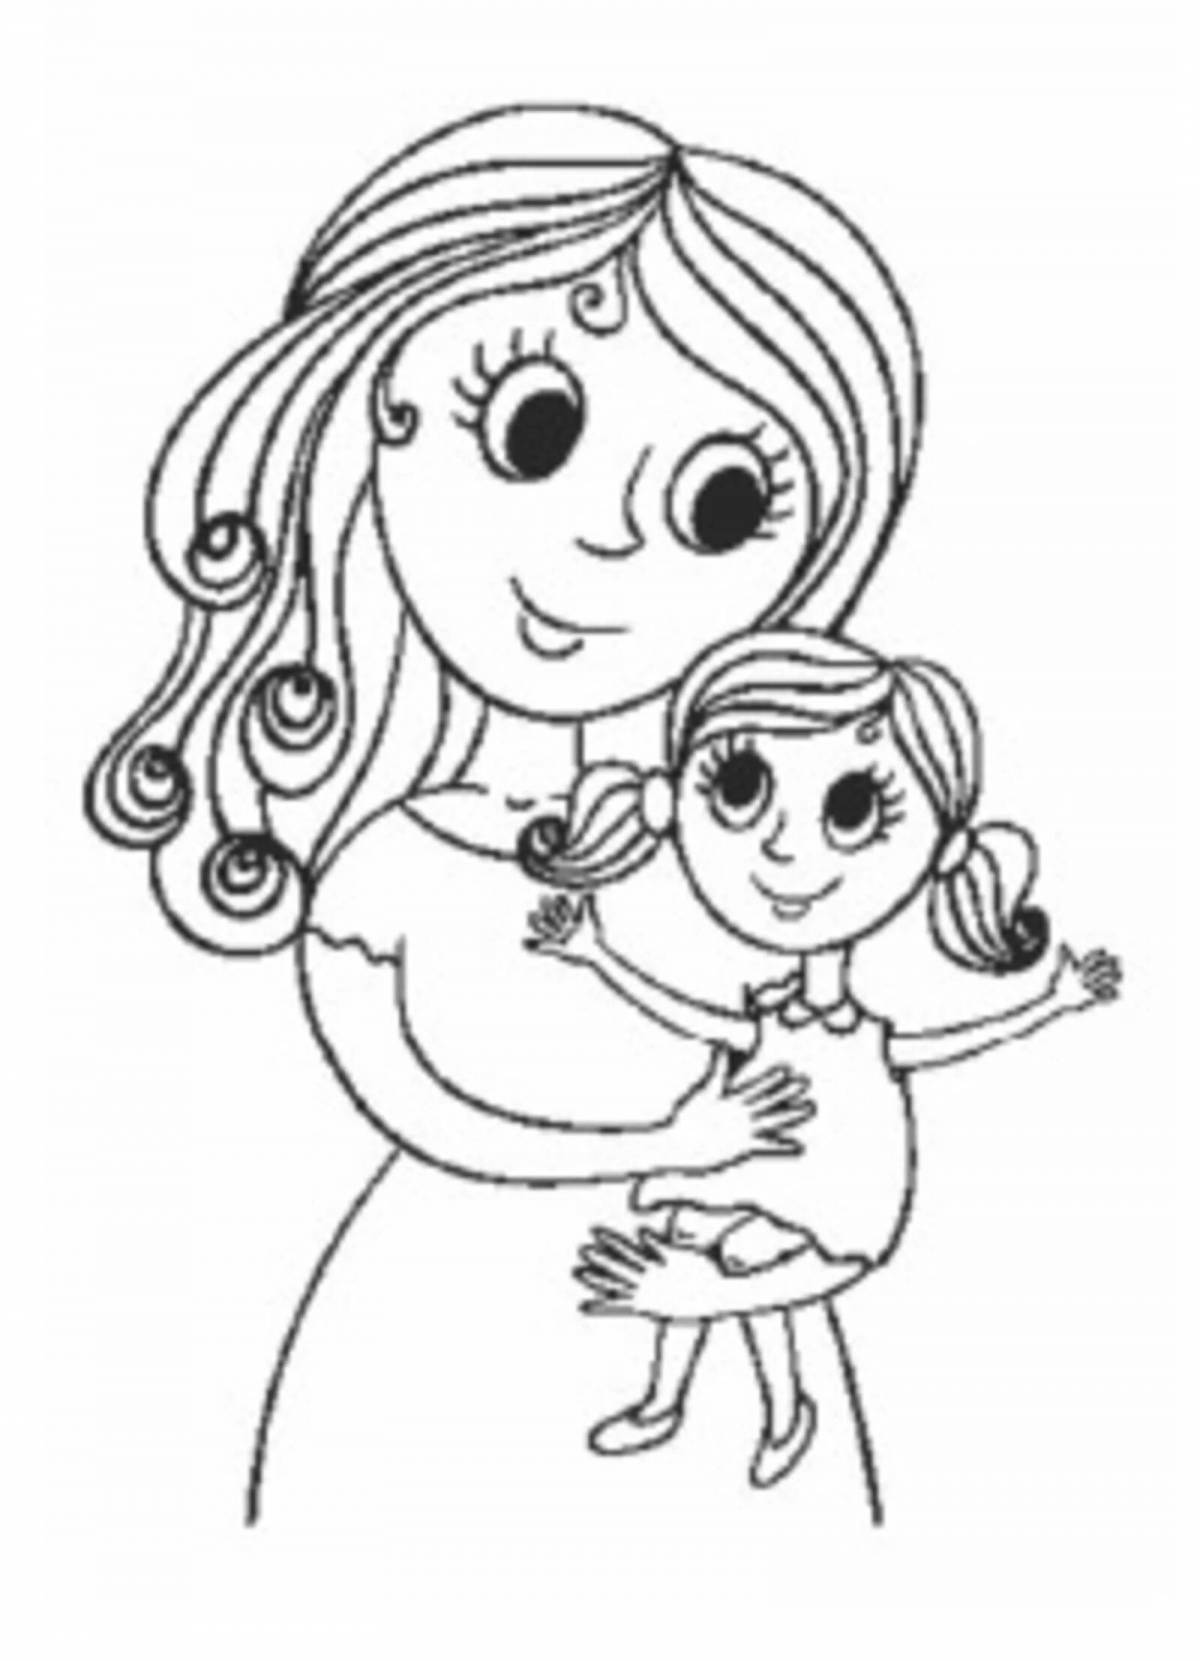 Coloring page my mom